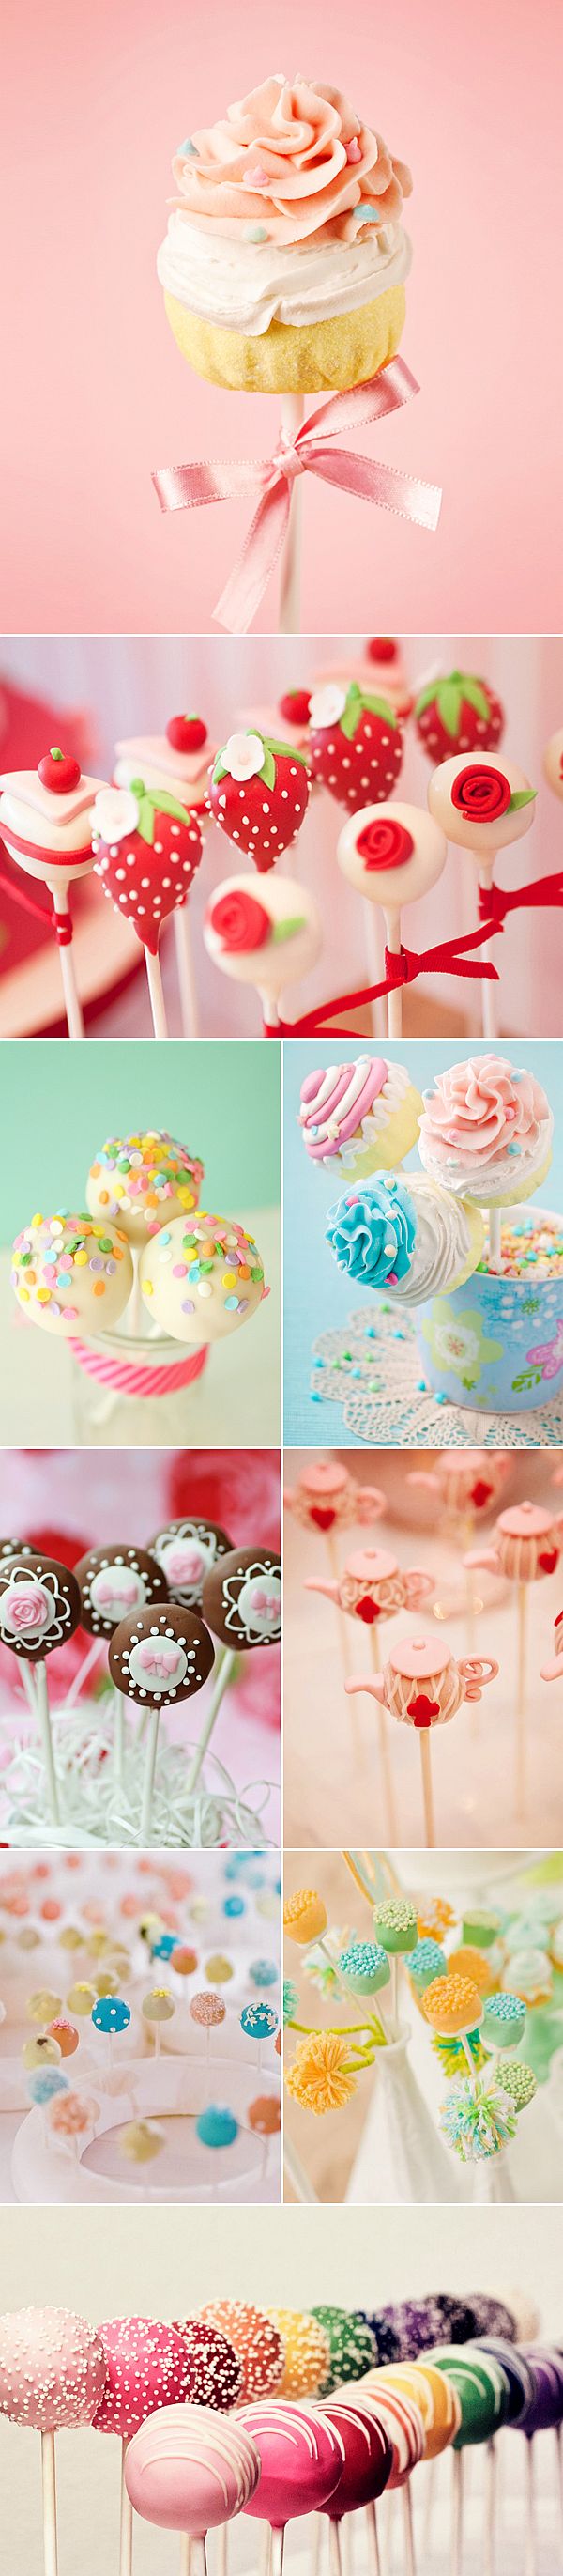 Super cute cakepop insprations Easy Guide to Making Awesome Cake Pops [Video + 19 Mouth Watering Ideas]